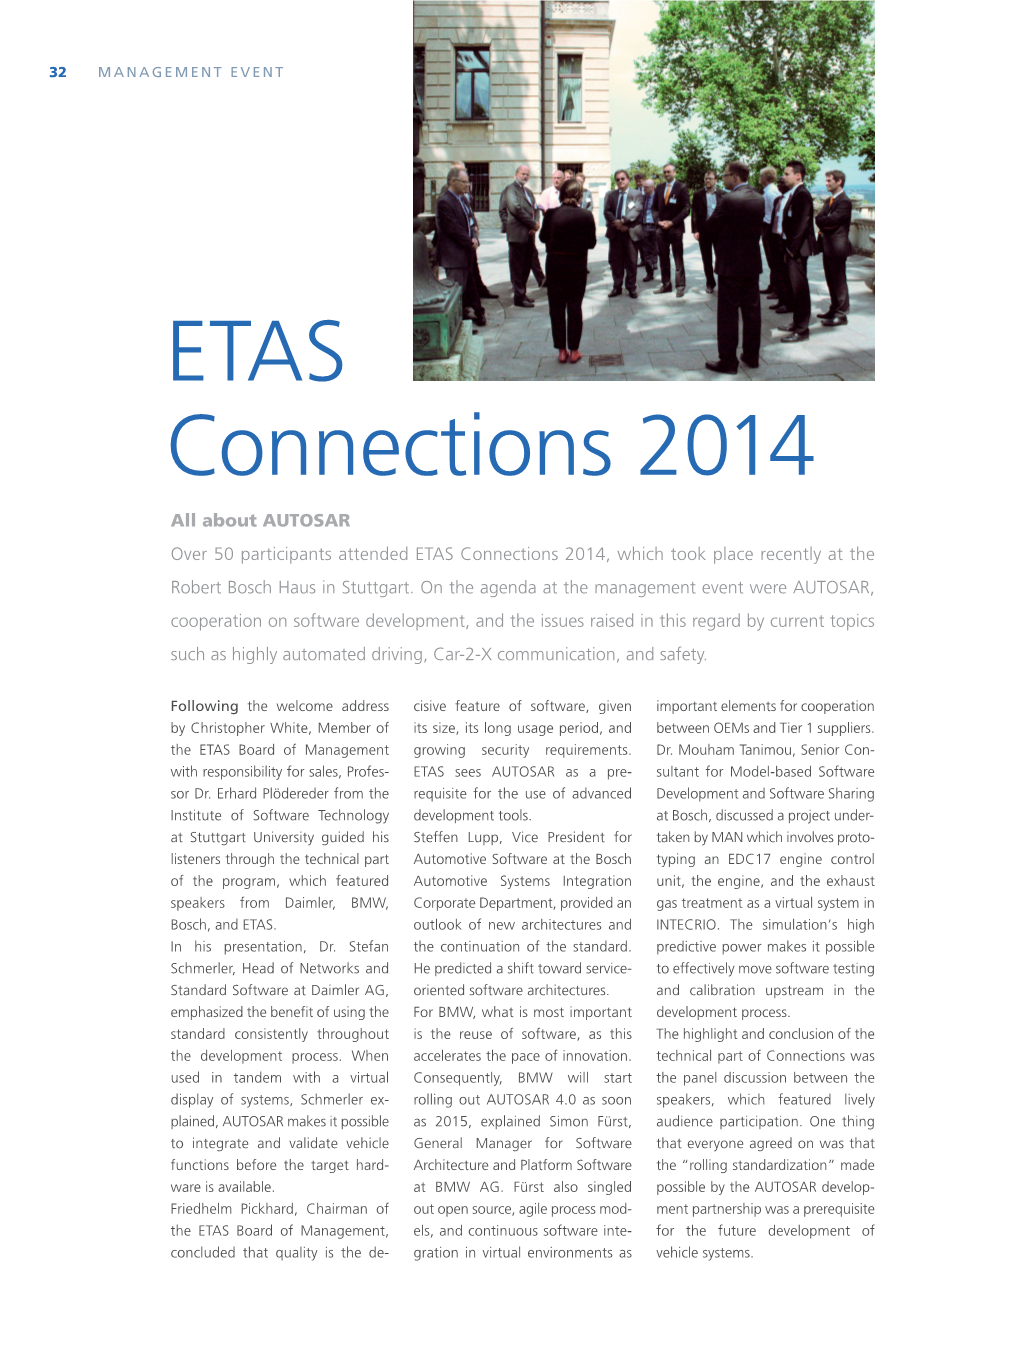 ETAS Connections 2014, Which Took Place Recently at the Mr